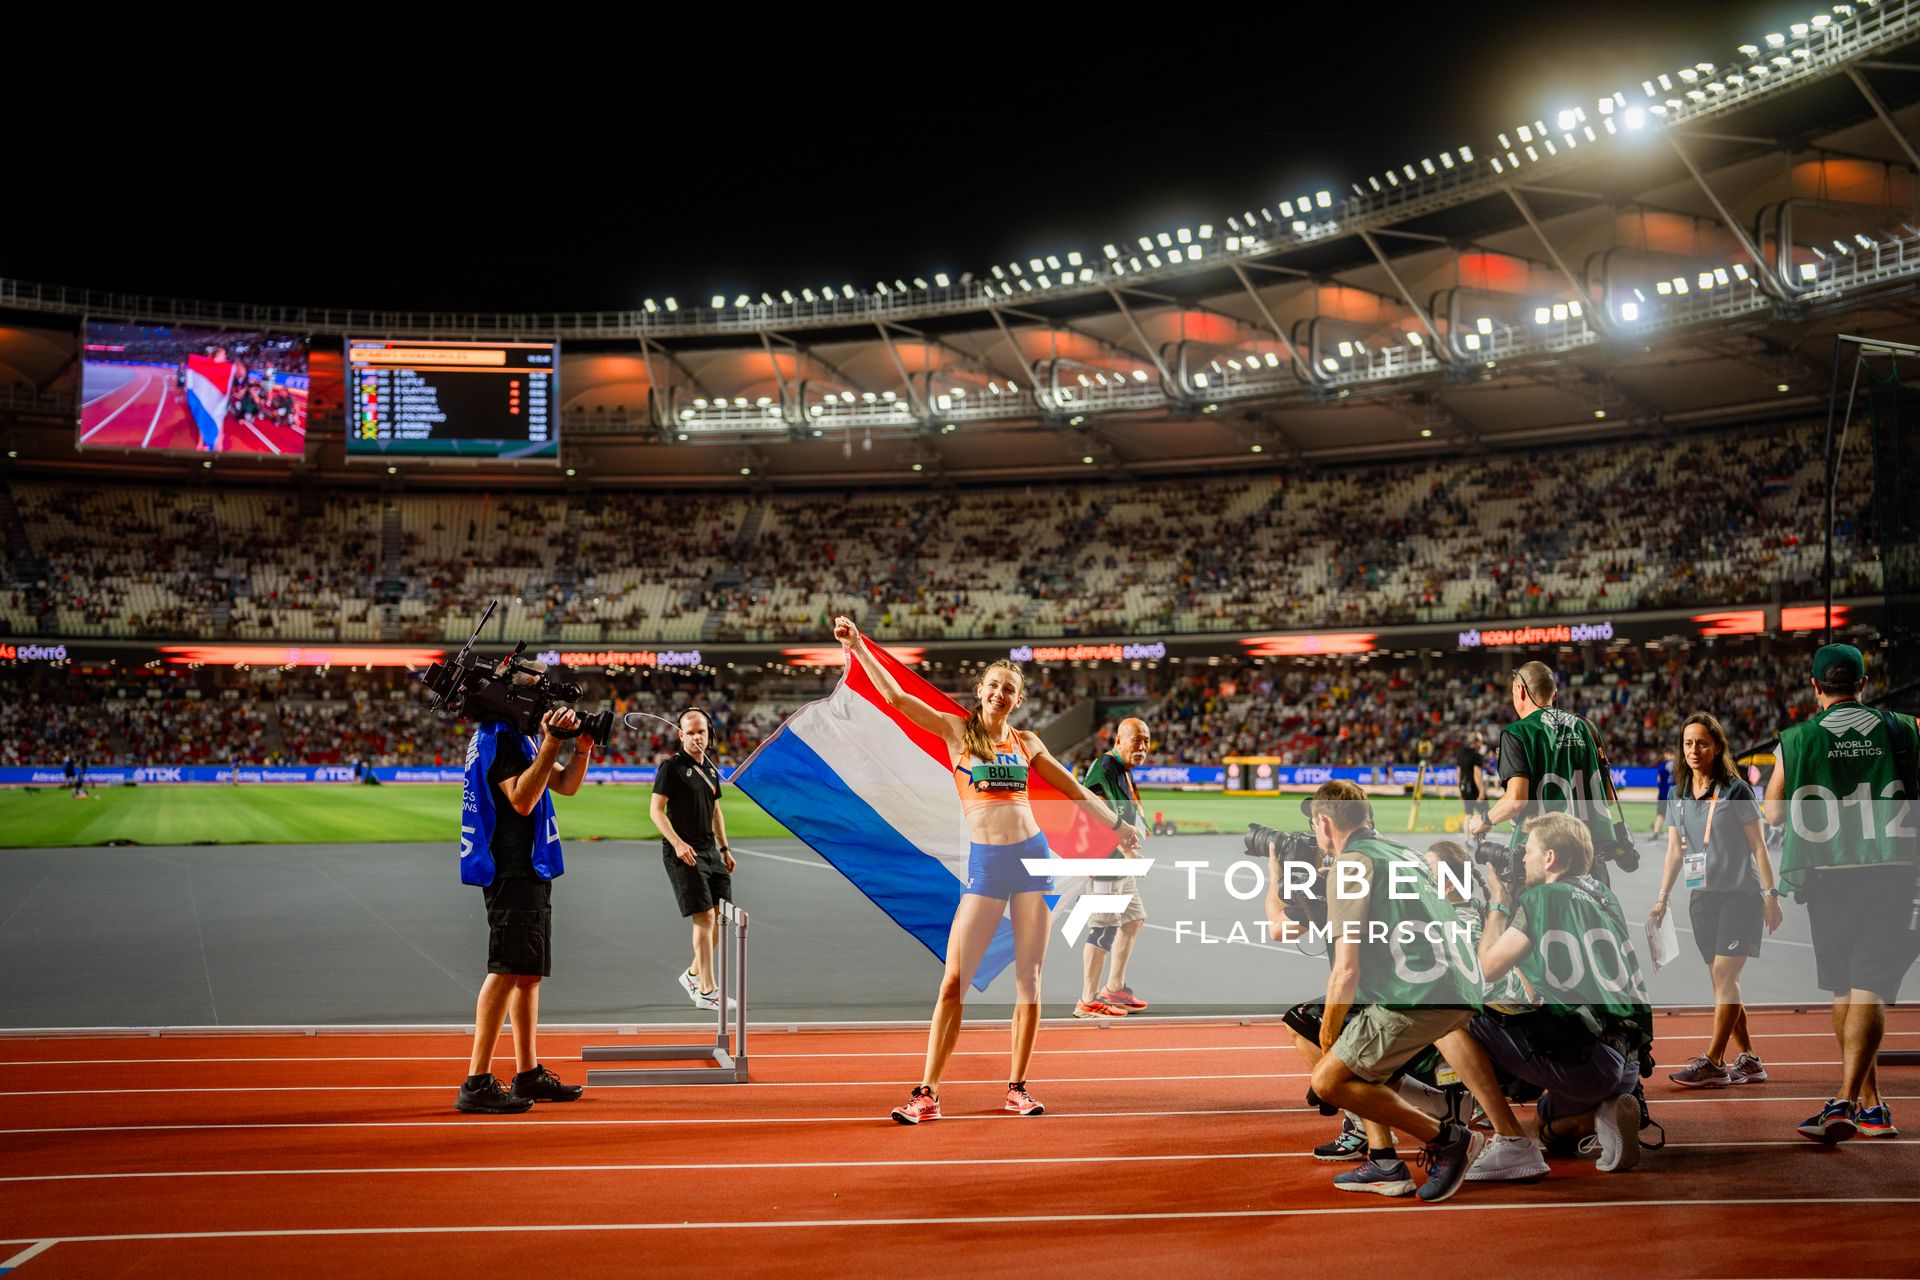 Femke Bol (NED/Netherlands) during the 400 Metres Hurdles Final on Day 6 of the World Athletics Championships Budapest 23 at the National Athletics Centre in Budapest, Hungary on August 24, 2023.